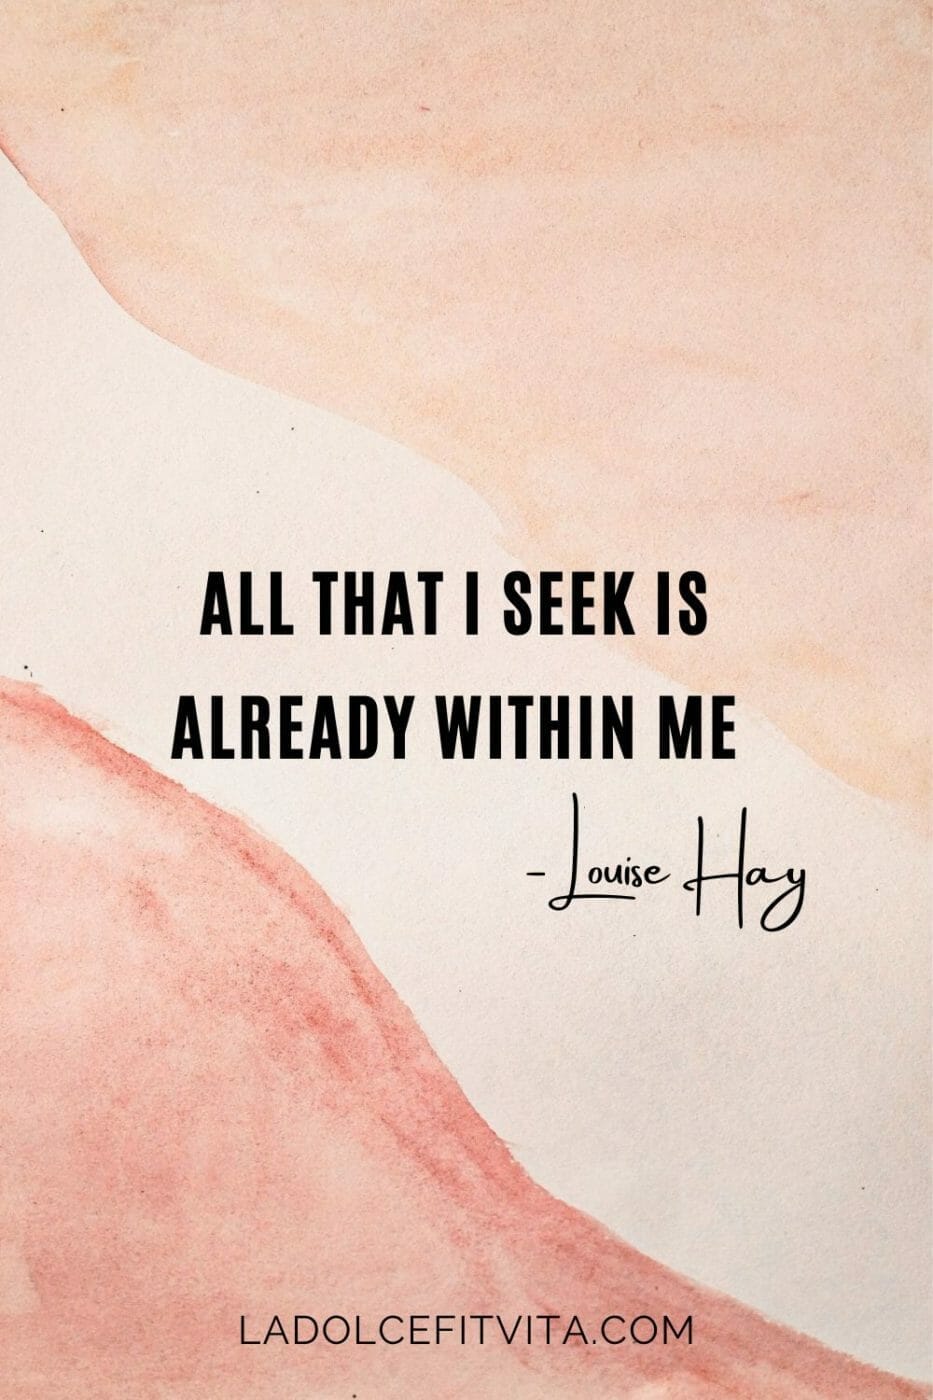 morning mindful routine affirmation that states all that I seek is within me.